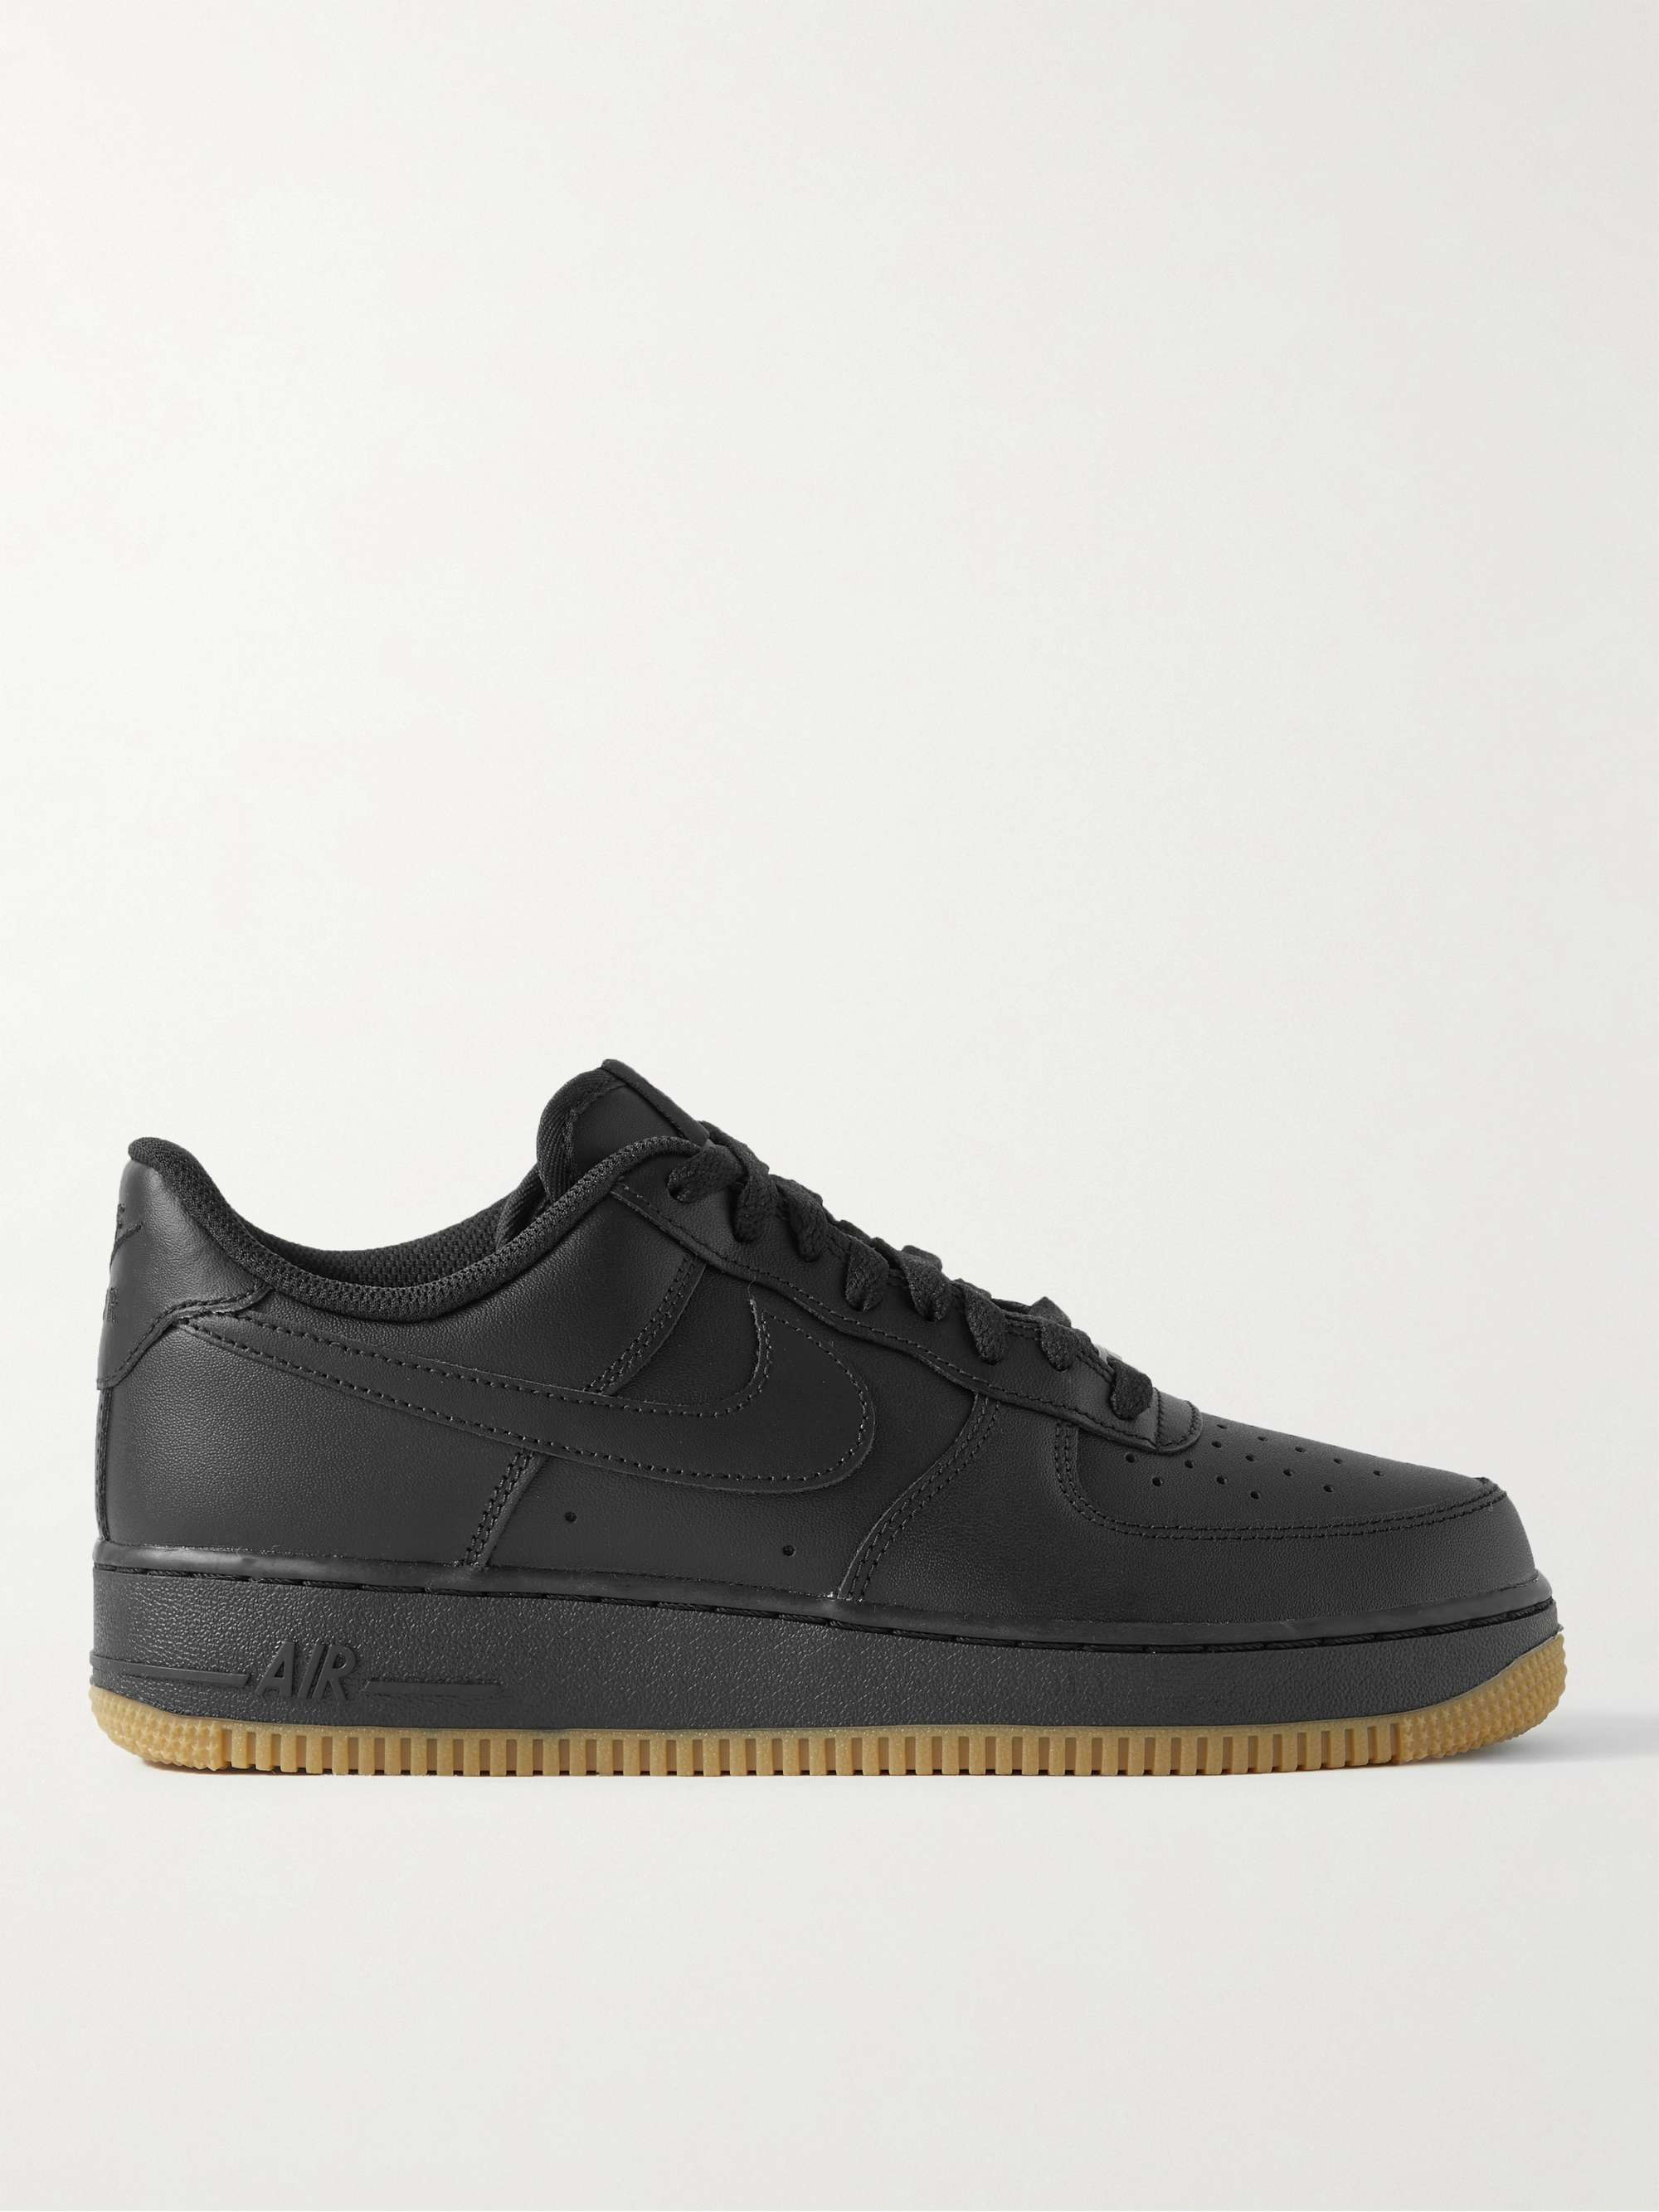 NIKE Air Force 1 '07 Leather Sneakers | MR PORTER